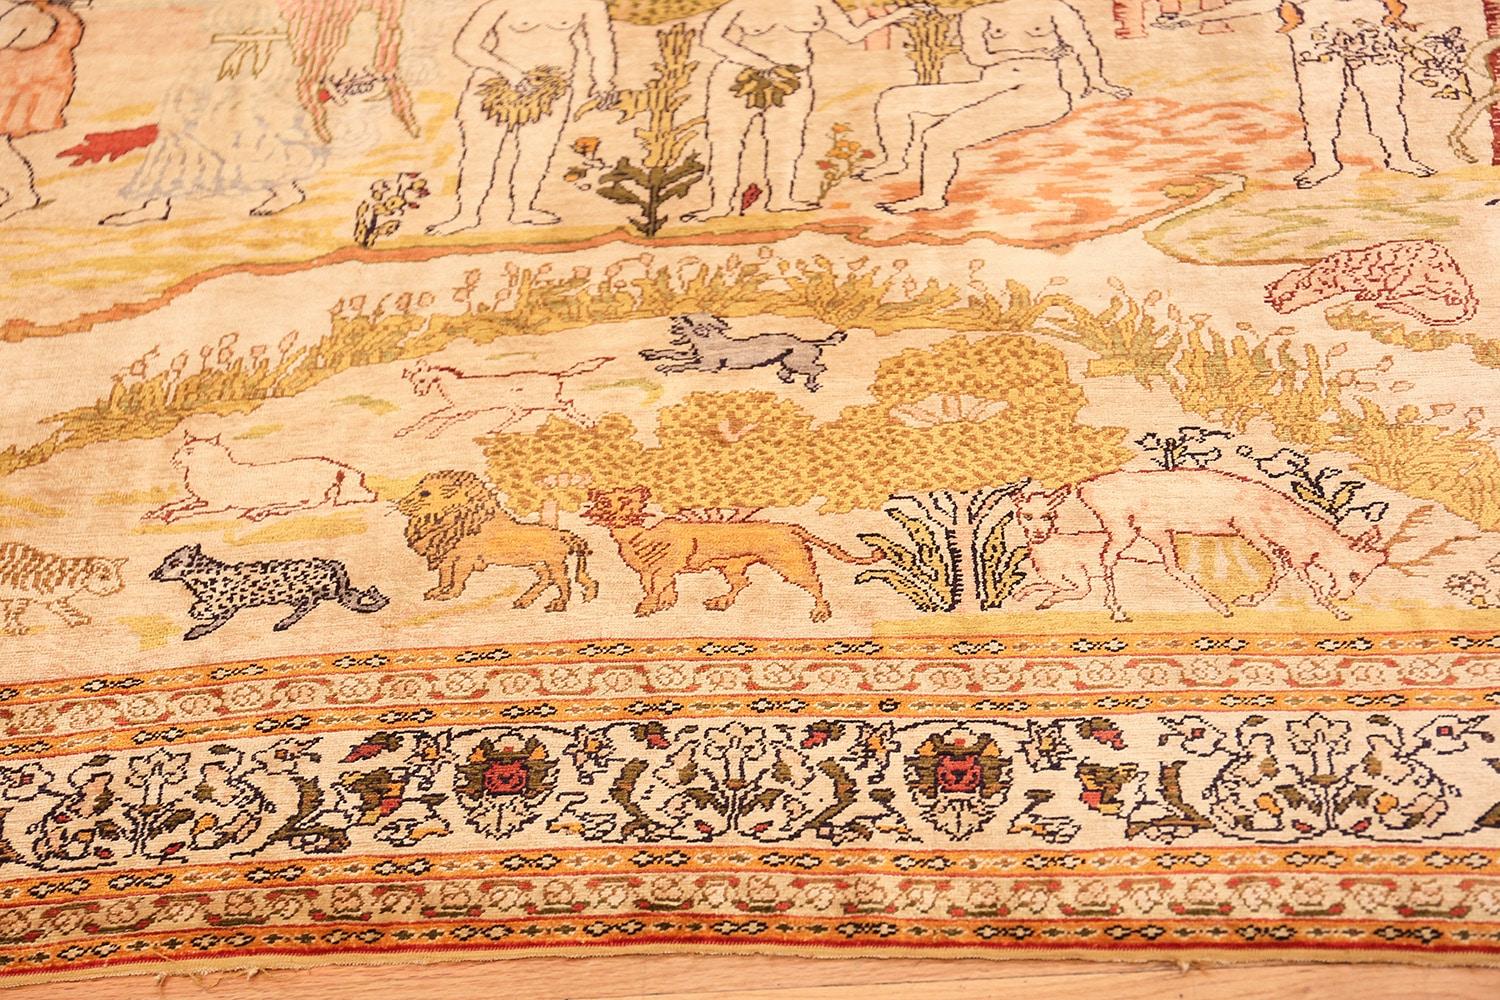 Fine Biblical Scene Turkish Pictorial Antique Silk Rug That Depicts The Story of The Banishment From The Garden Of Eden, Country of Origin / Rug Type: Turkish Rug, Circa Date: Late 19th Century. Size: 7 ft x 5 ft (2.13 m x 1.52 m)

